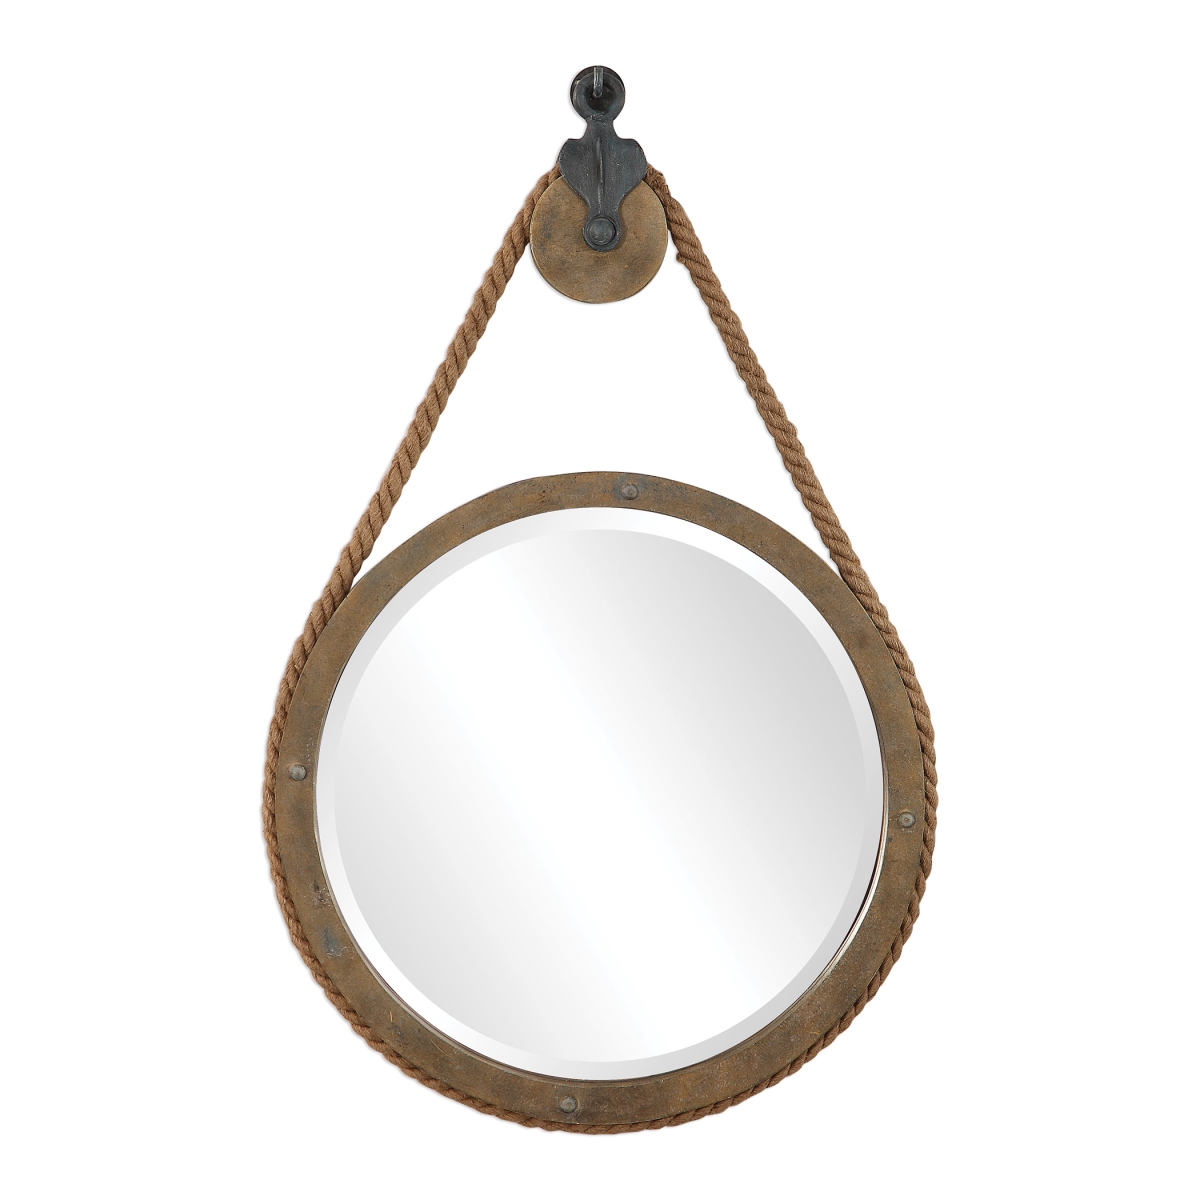 Picture of 212 Main 09490 Melton Round Pulley Mirror